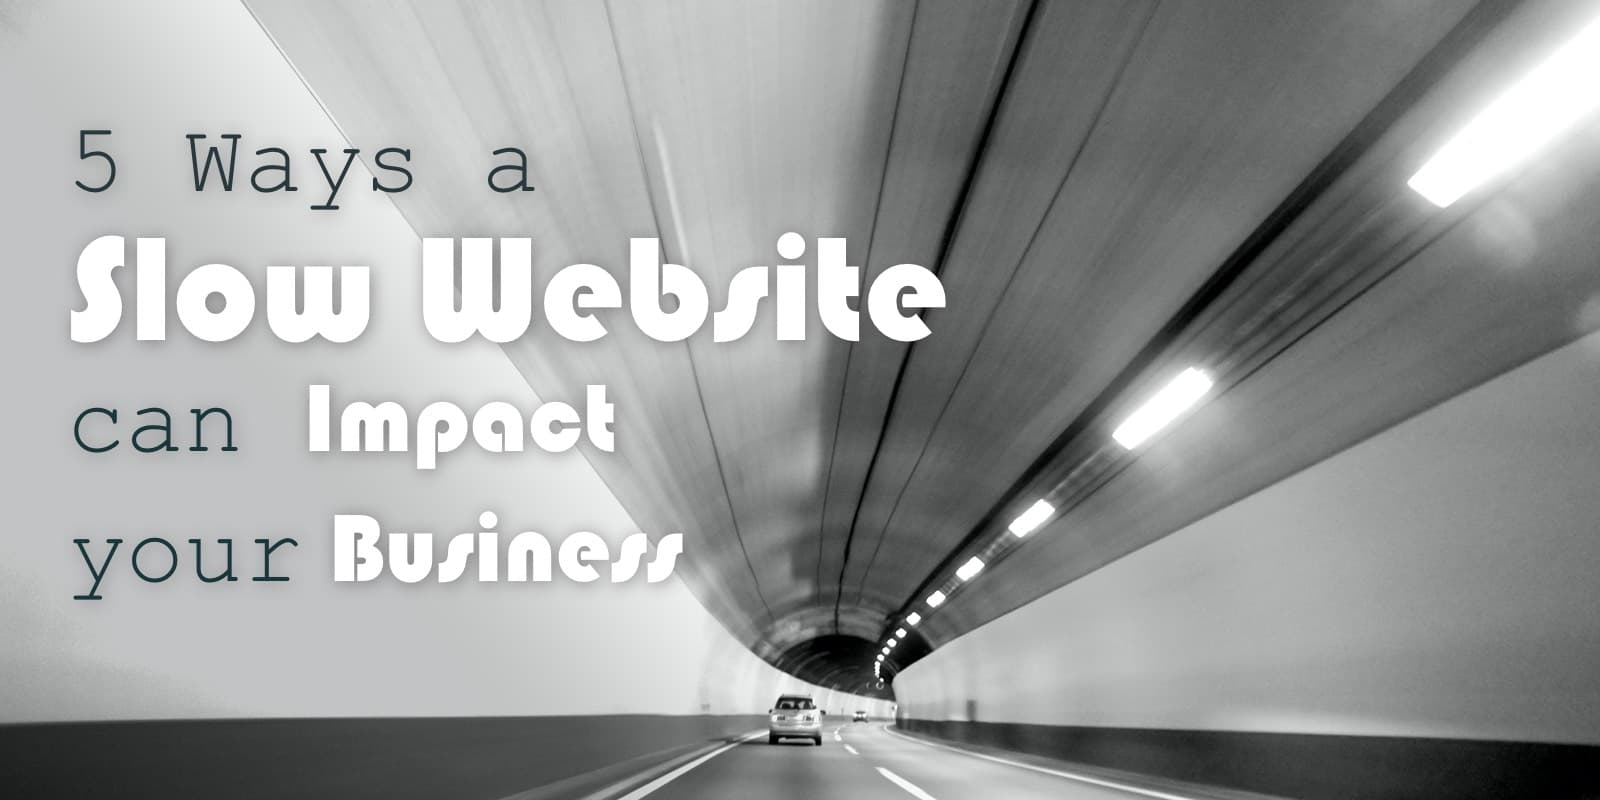 5 Ways a Slow Website Can Impact Your Business